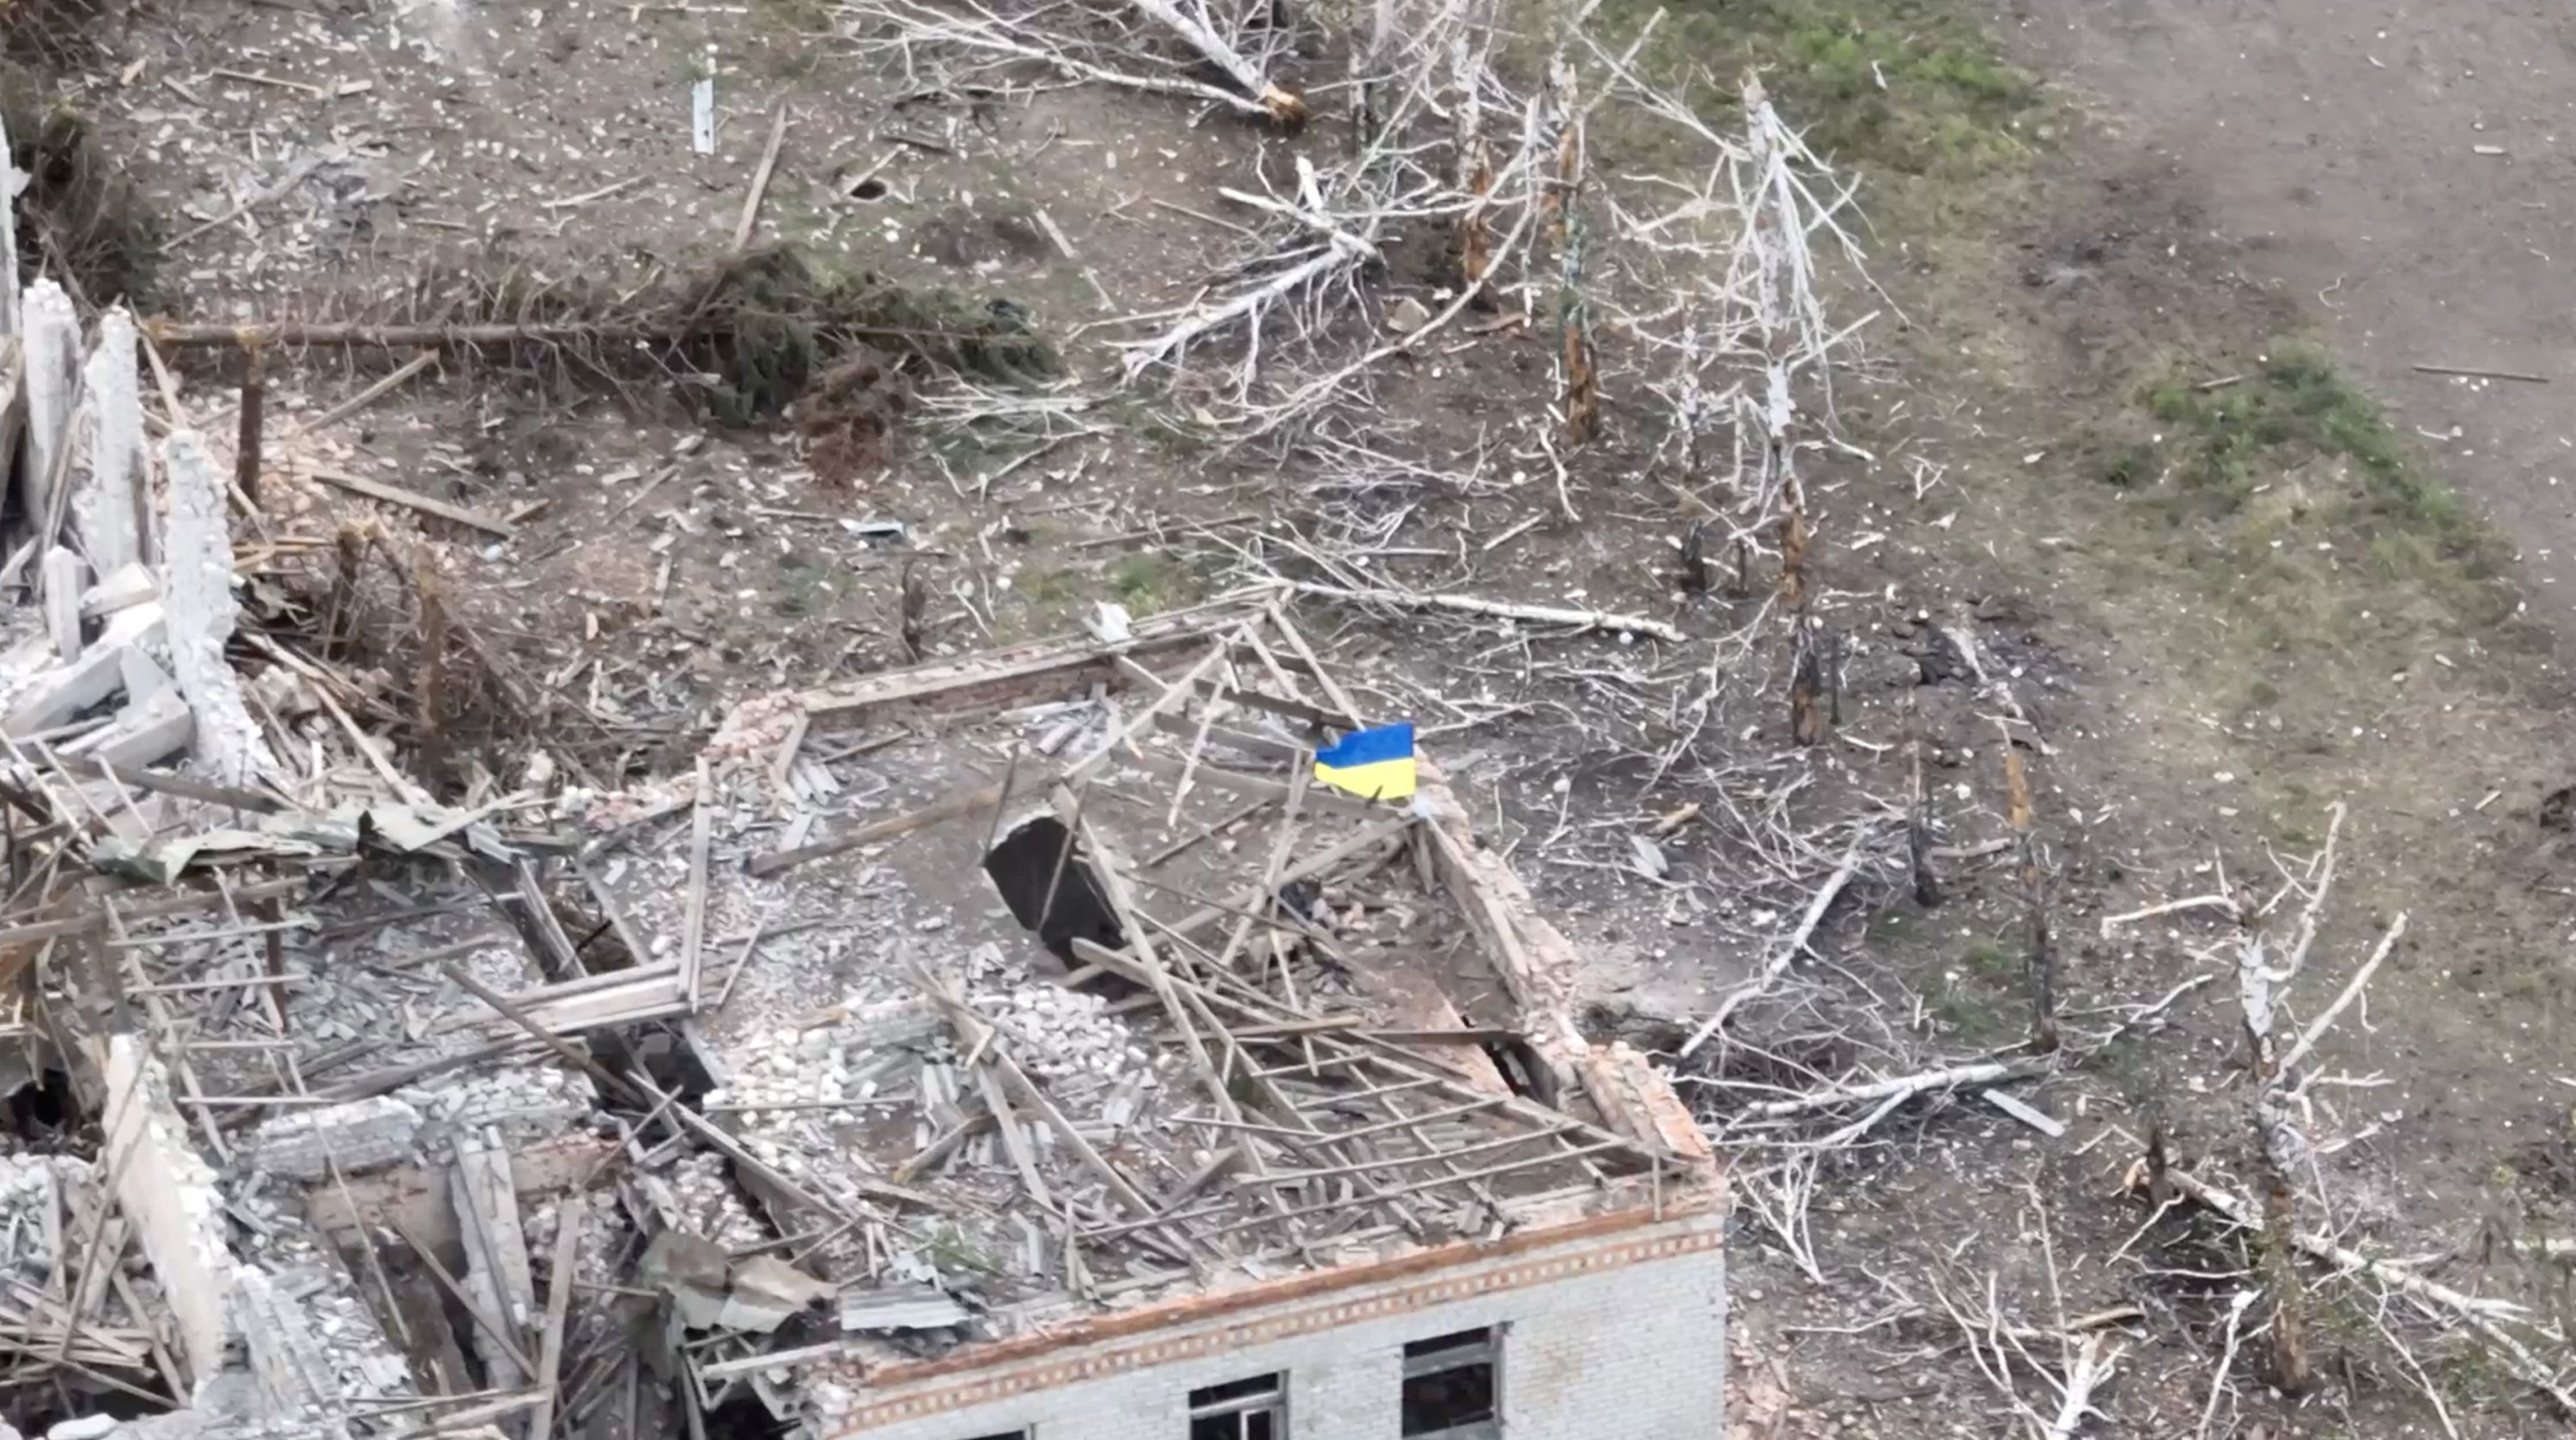 A Ukrainian flag flies above a destroyed building in the settlement of Robotyne, Ukraine, in this screen grab taken from a social media video released August 23.